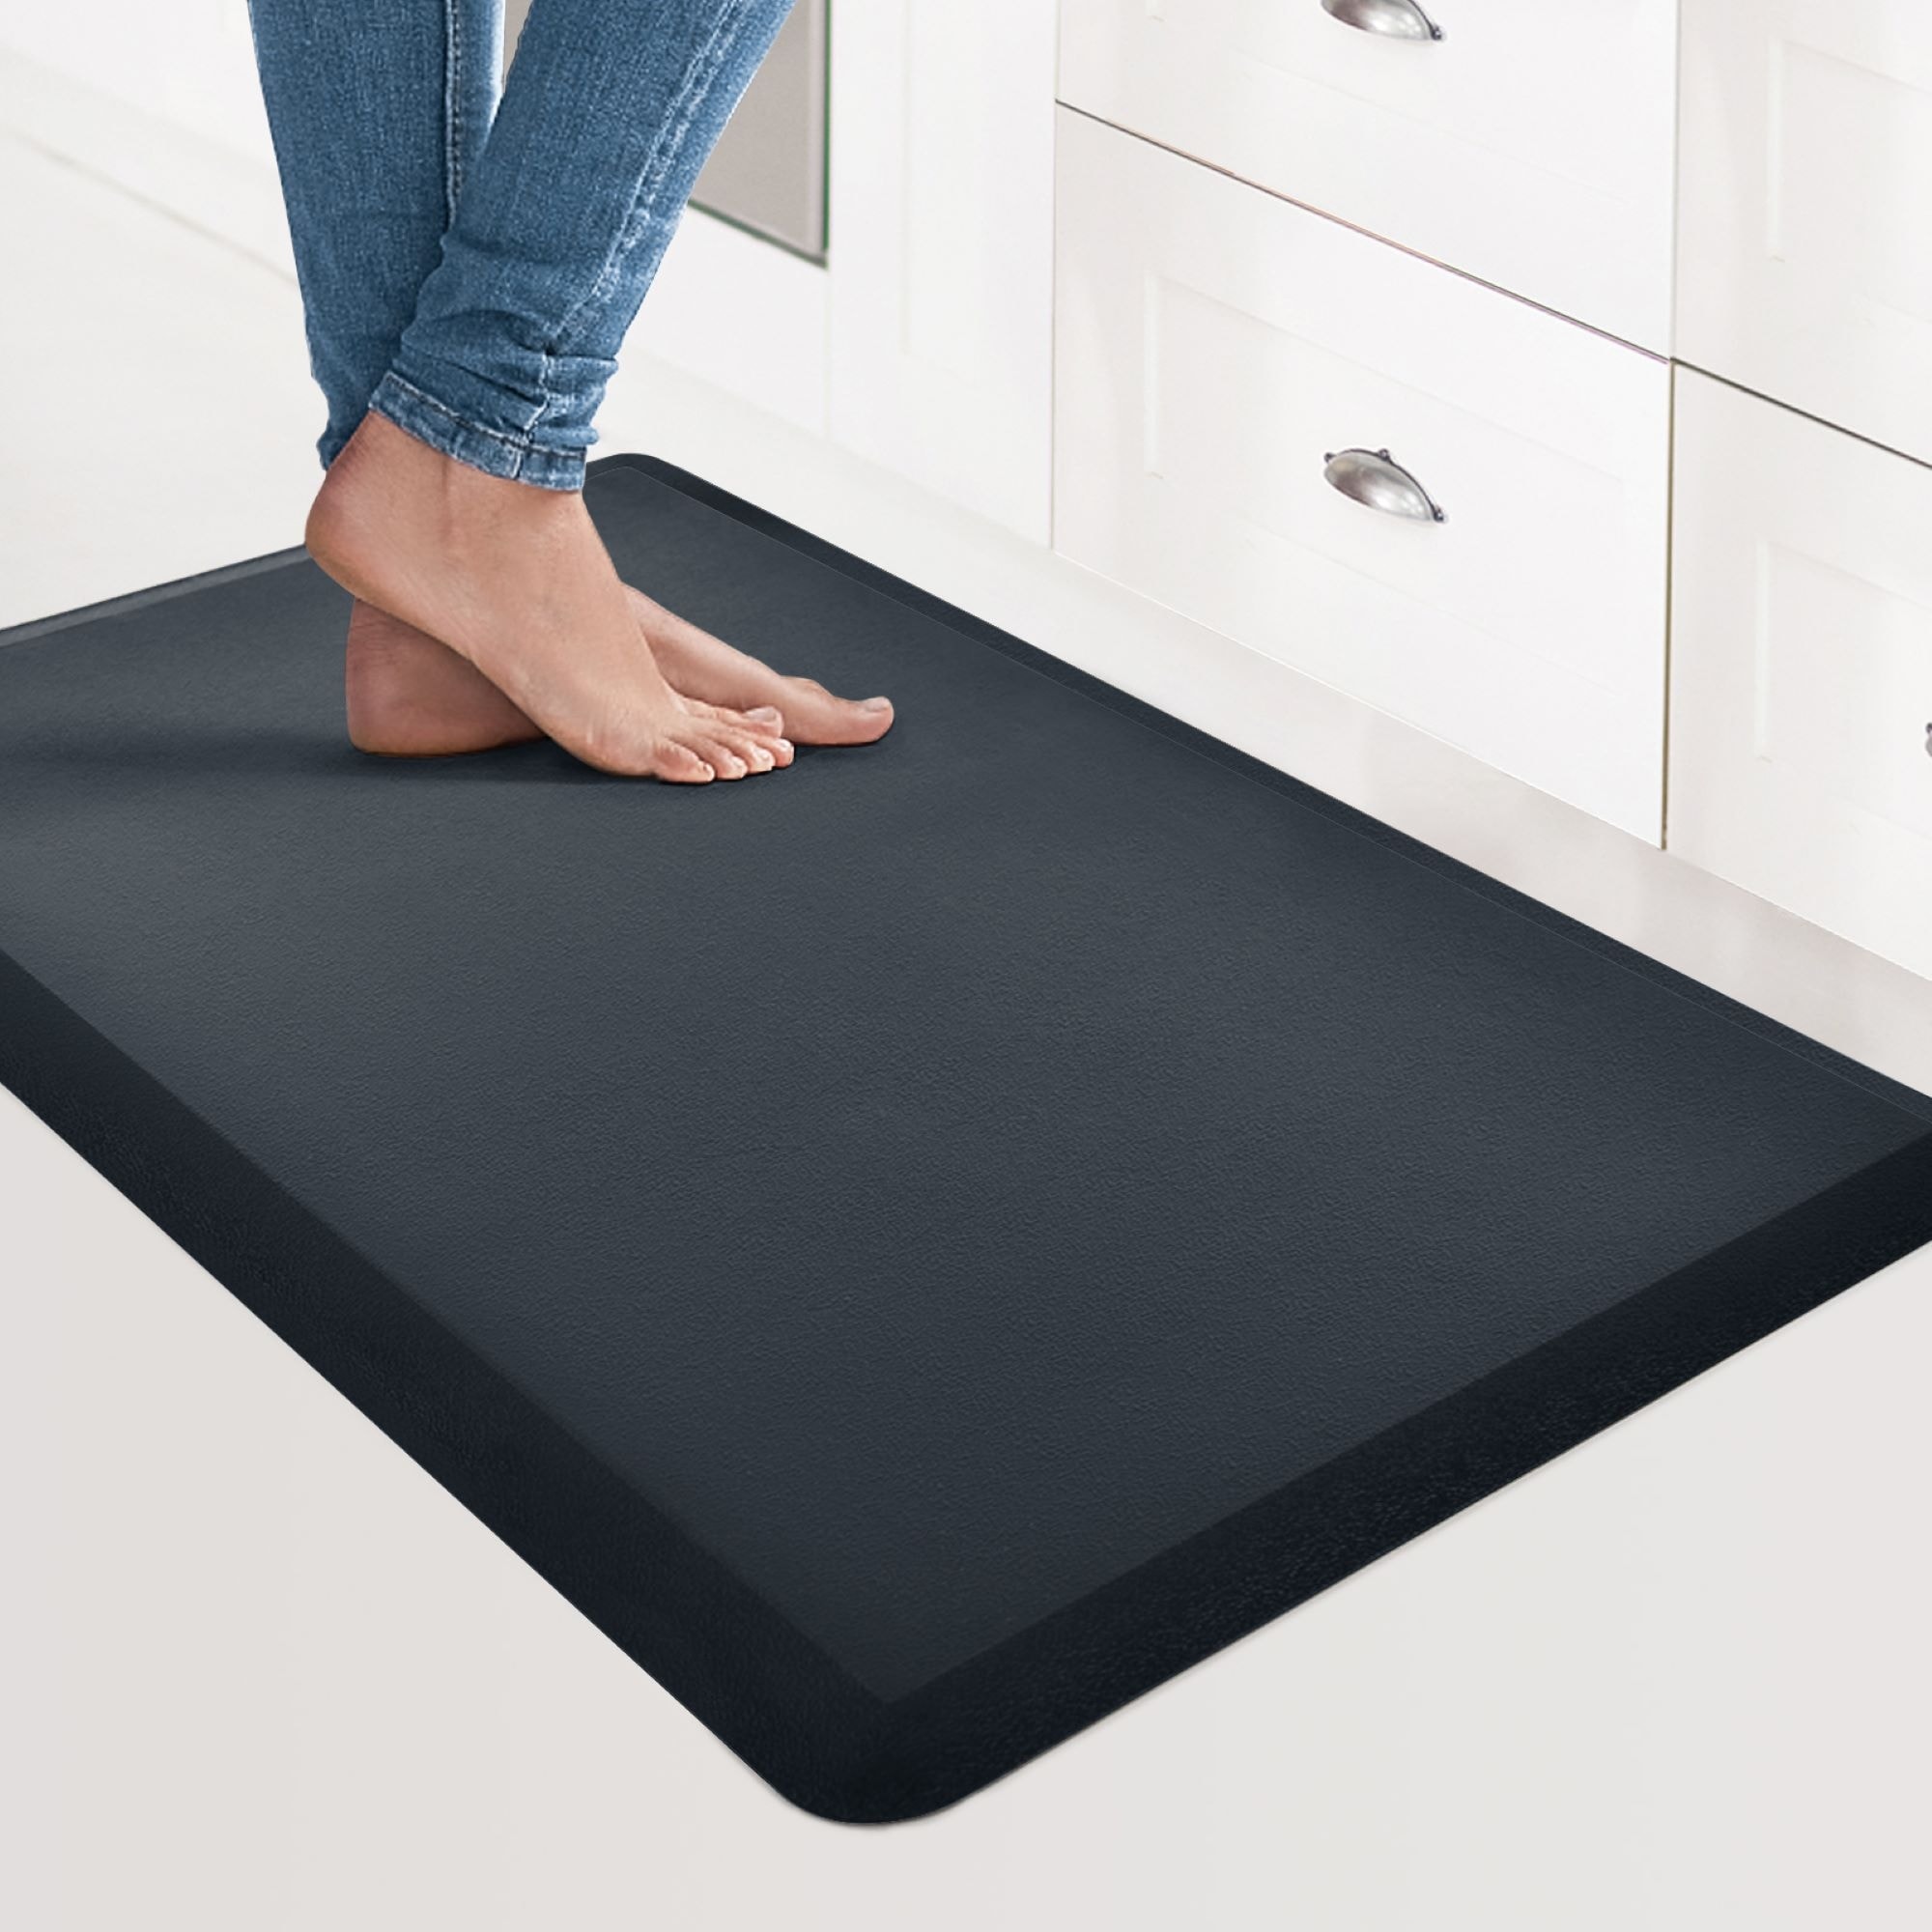 https://ak1.ostkcdn.com/images/products/is/images/direct/a1c67501ca971d94f433b0095cf153307f7246e0/Premium-Anti-Fatigue-Comfort-Mat%2C-Thick%2C-Non-Slip-%26-All-Purpose-Comfort---for-Kitchen%2C-Office-Standing-Desk.jpg